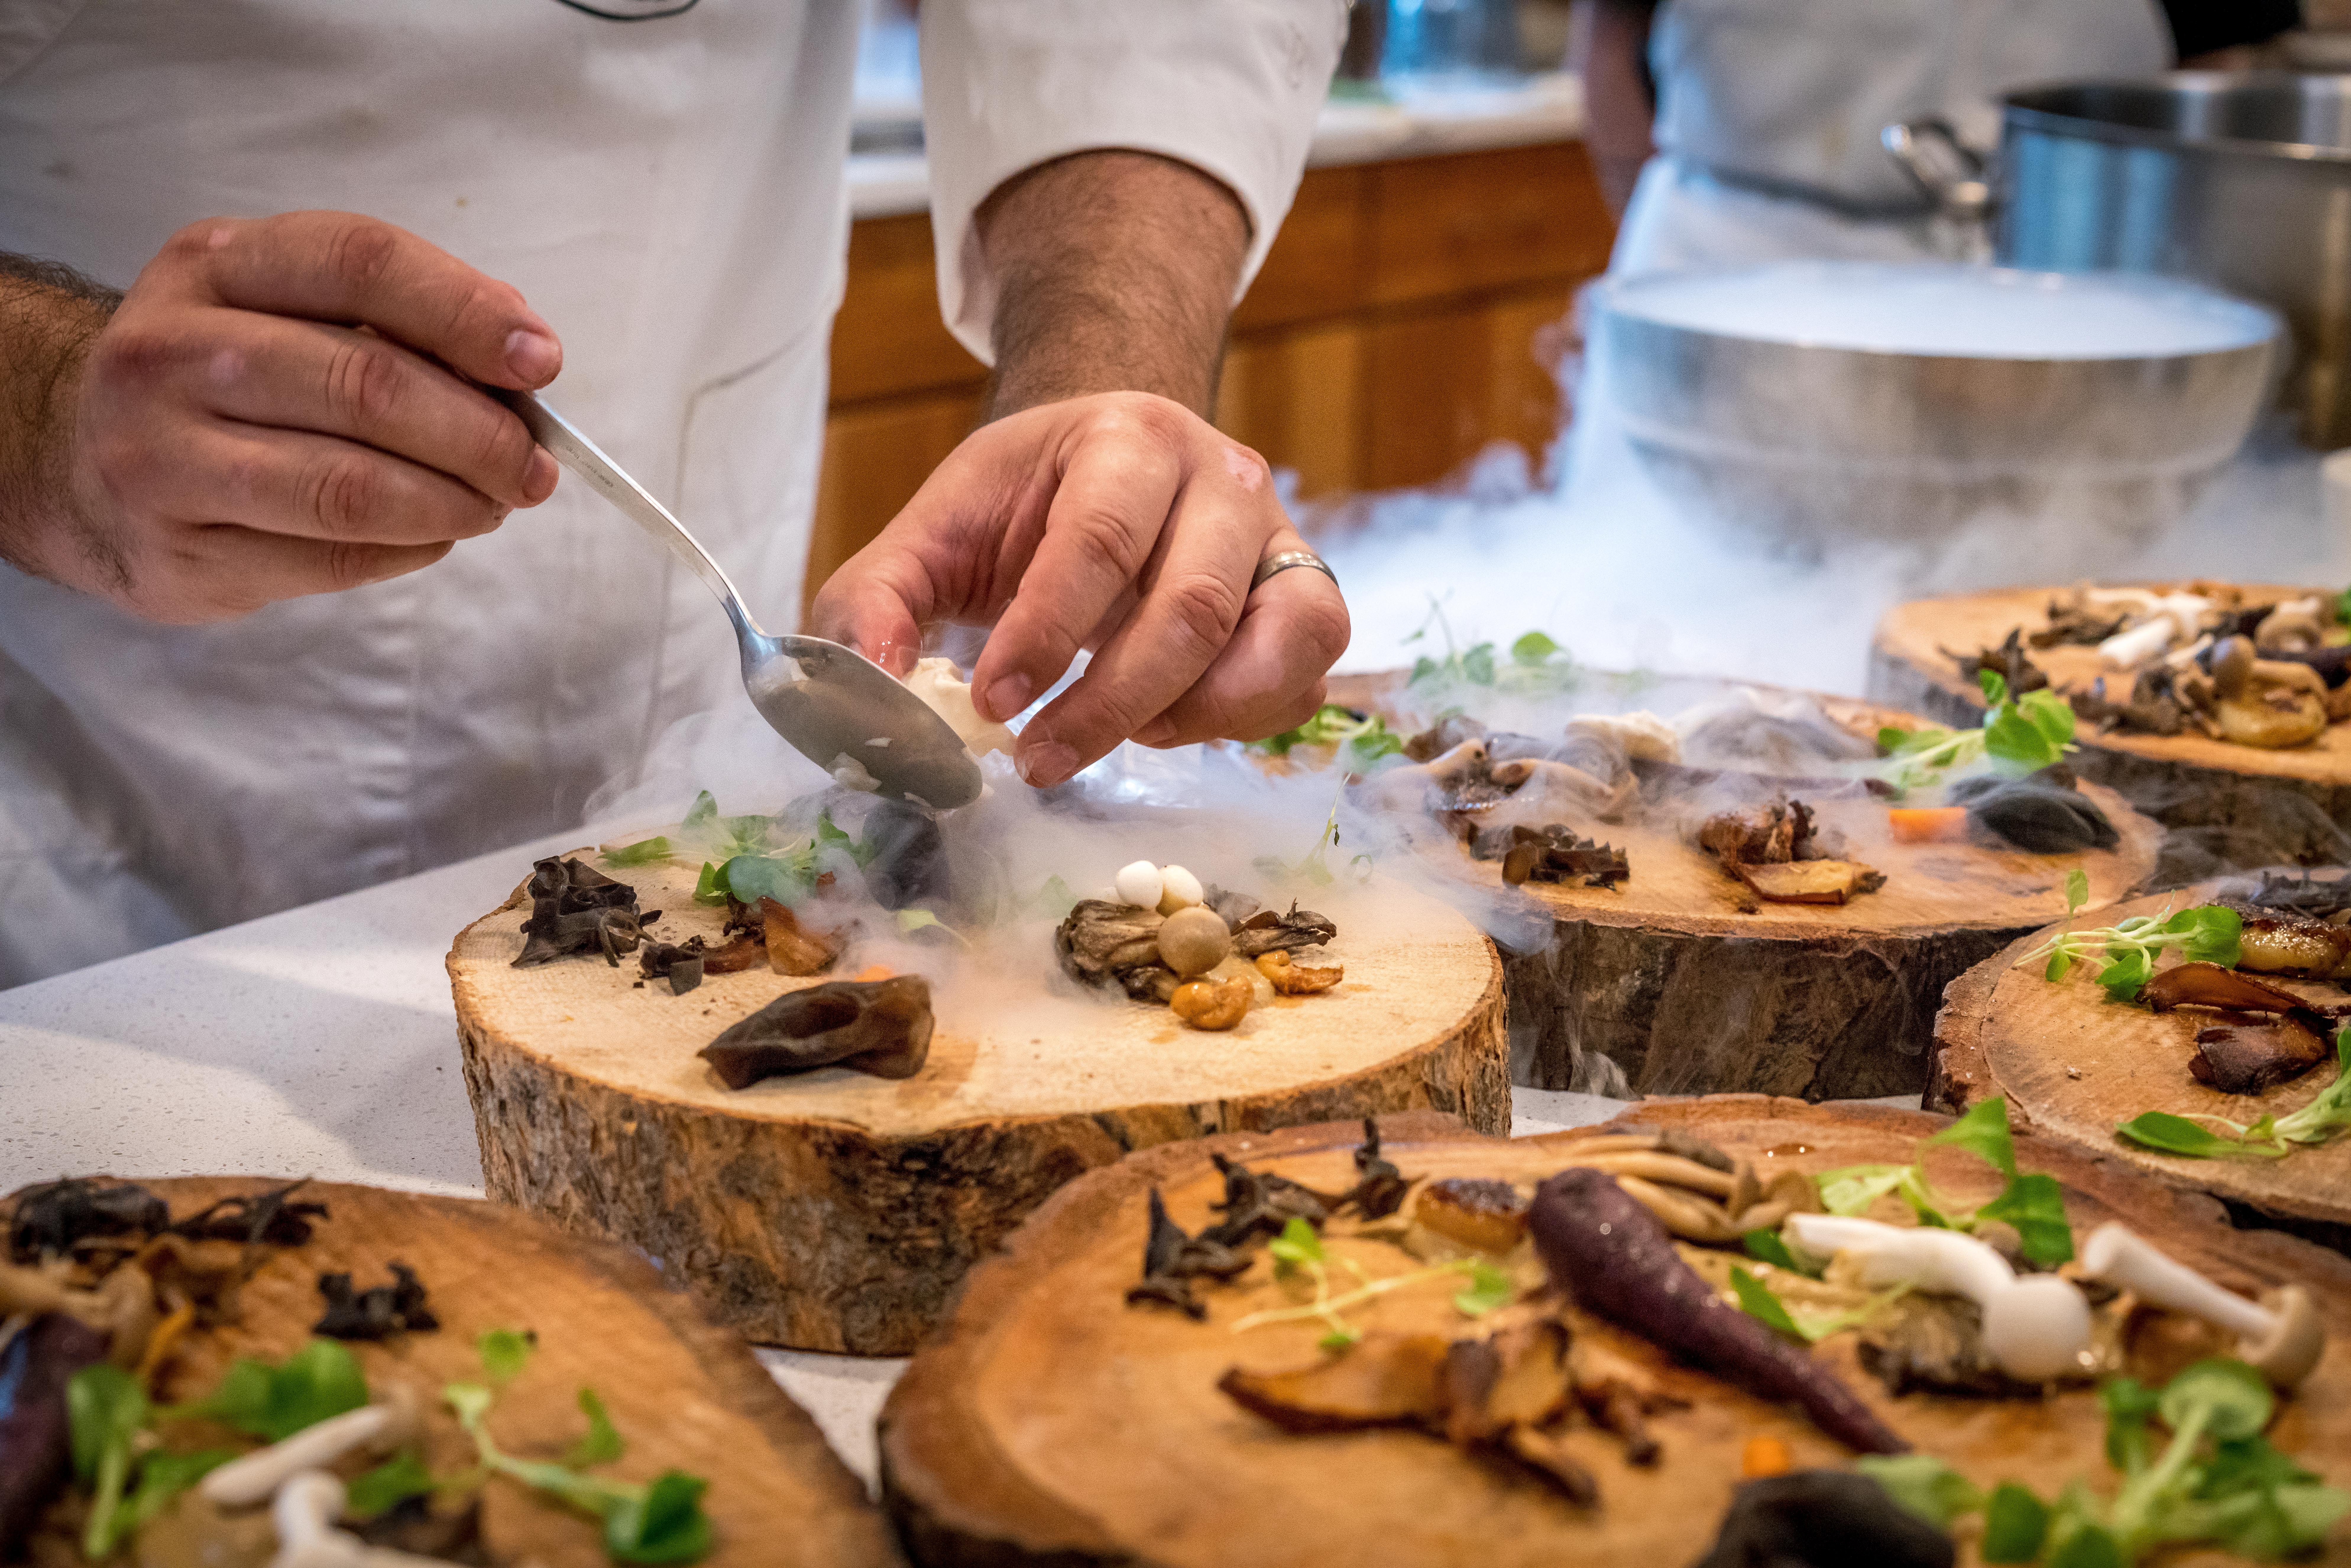 chef plating on wood rounds at an upscale restaurant